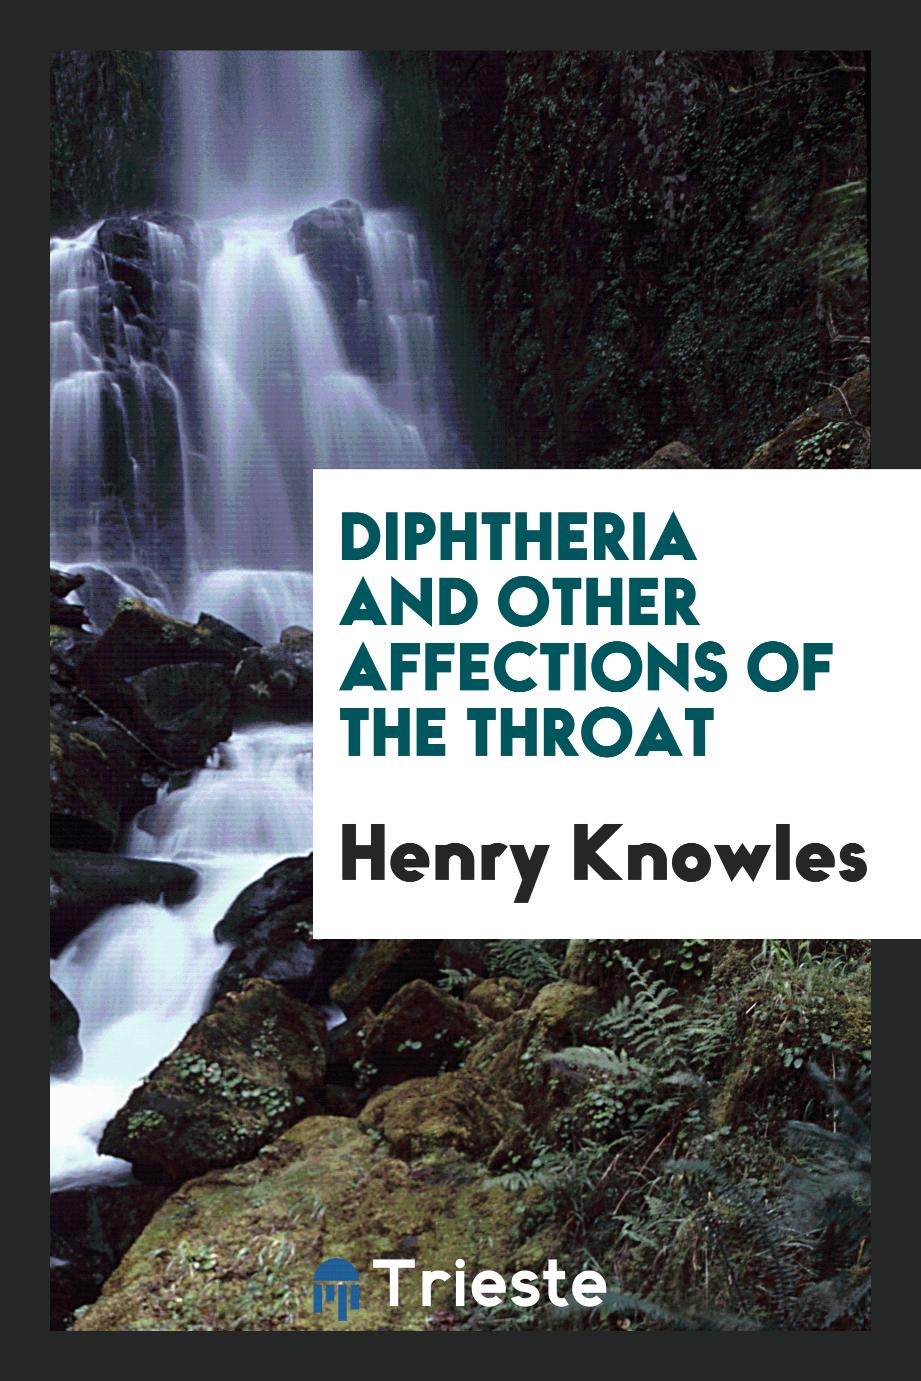 Diphtheria and other affections of the throat